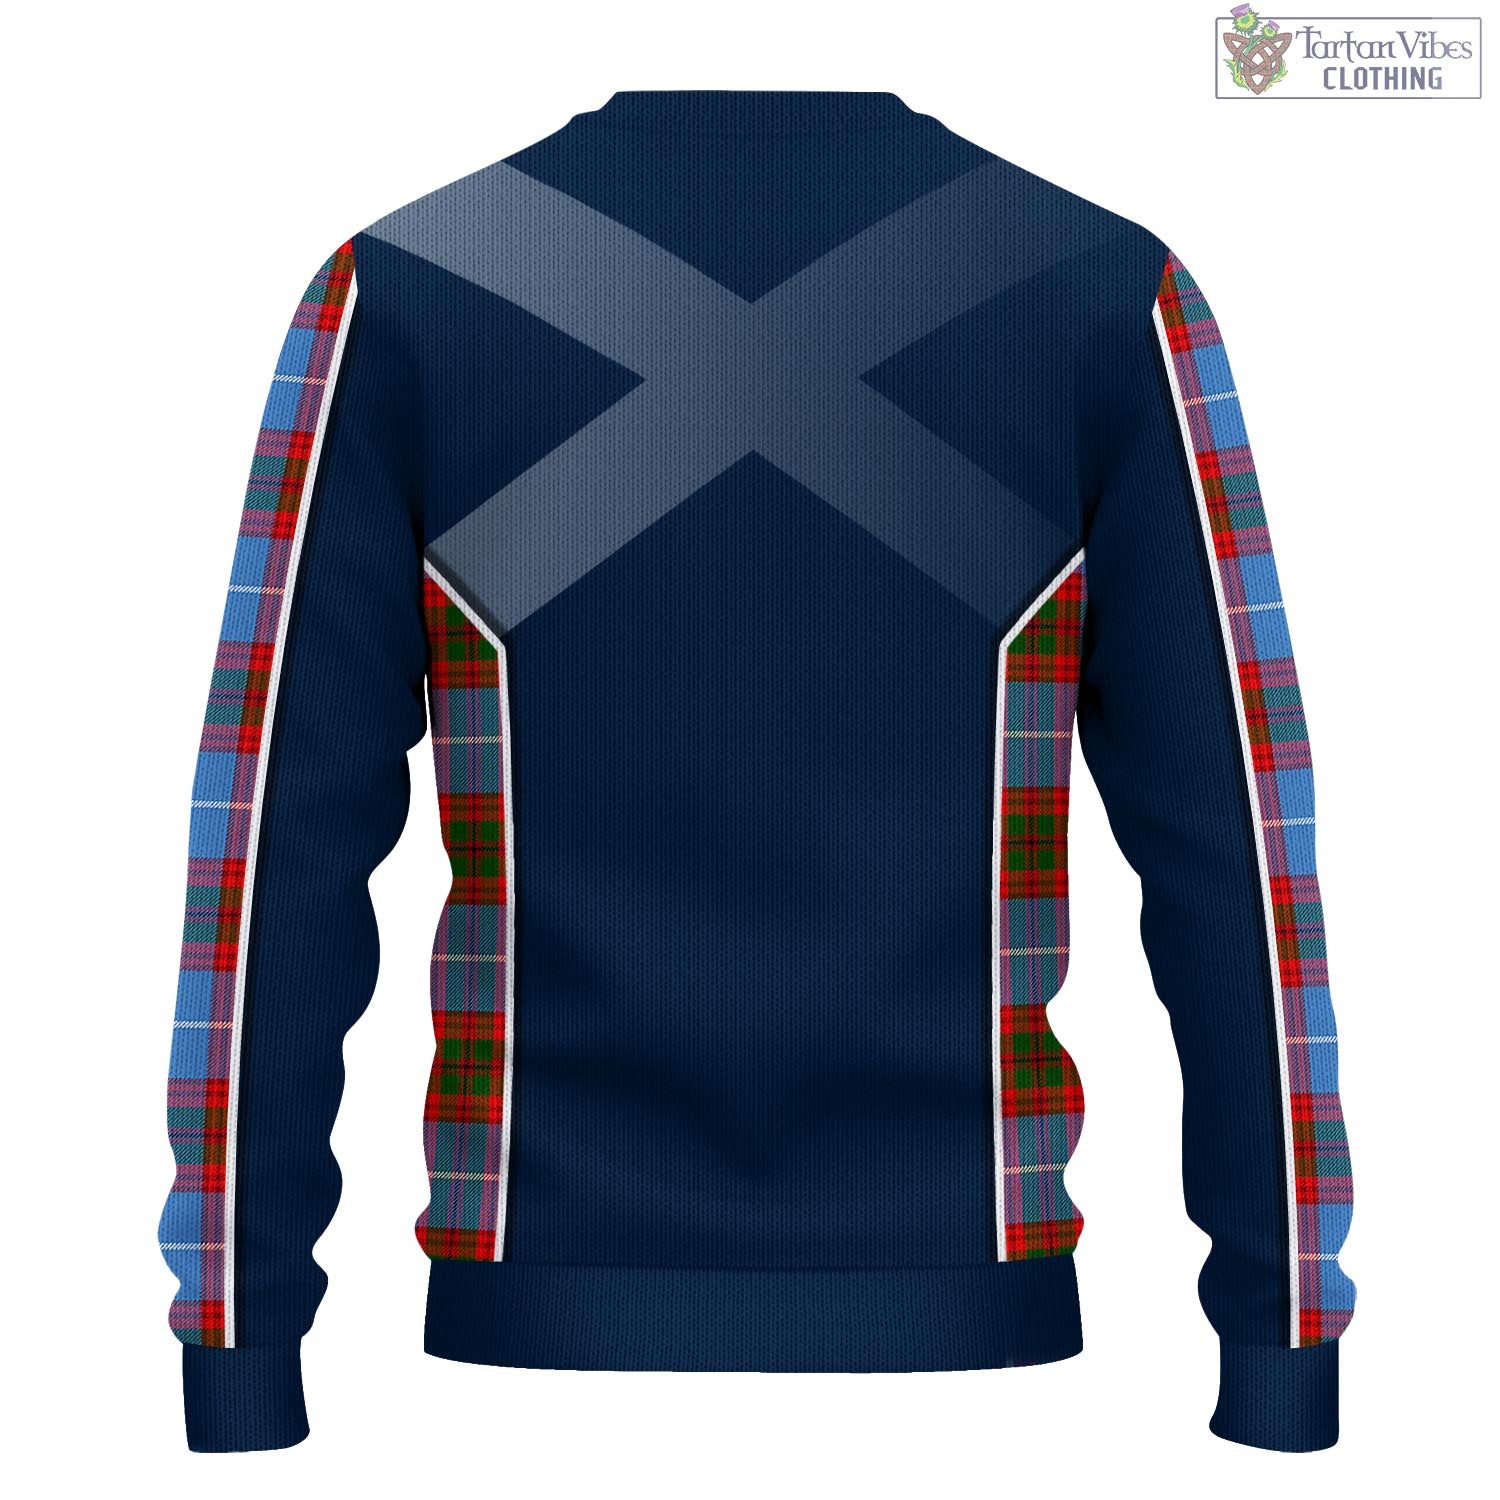 Tartan Vibes Clothing Trotter Tartan Knitted Sweatshirt with Family Crest and Scottish Thistle Vibes Sport Style